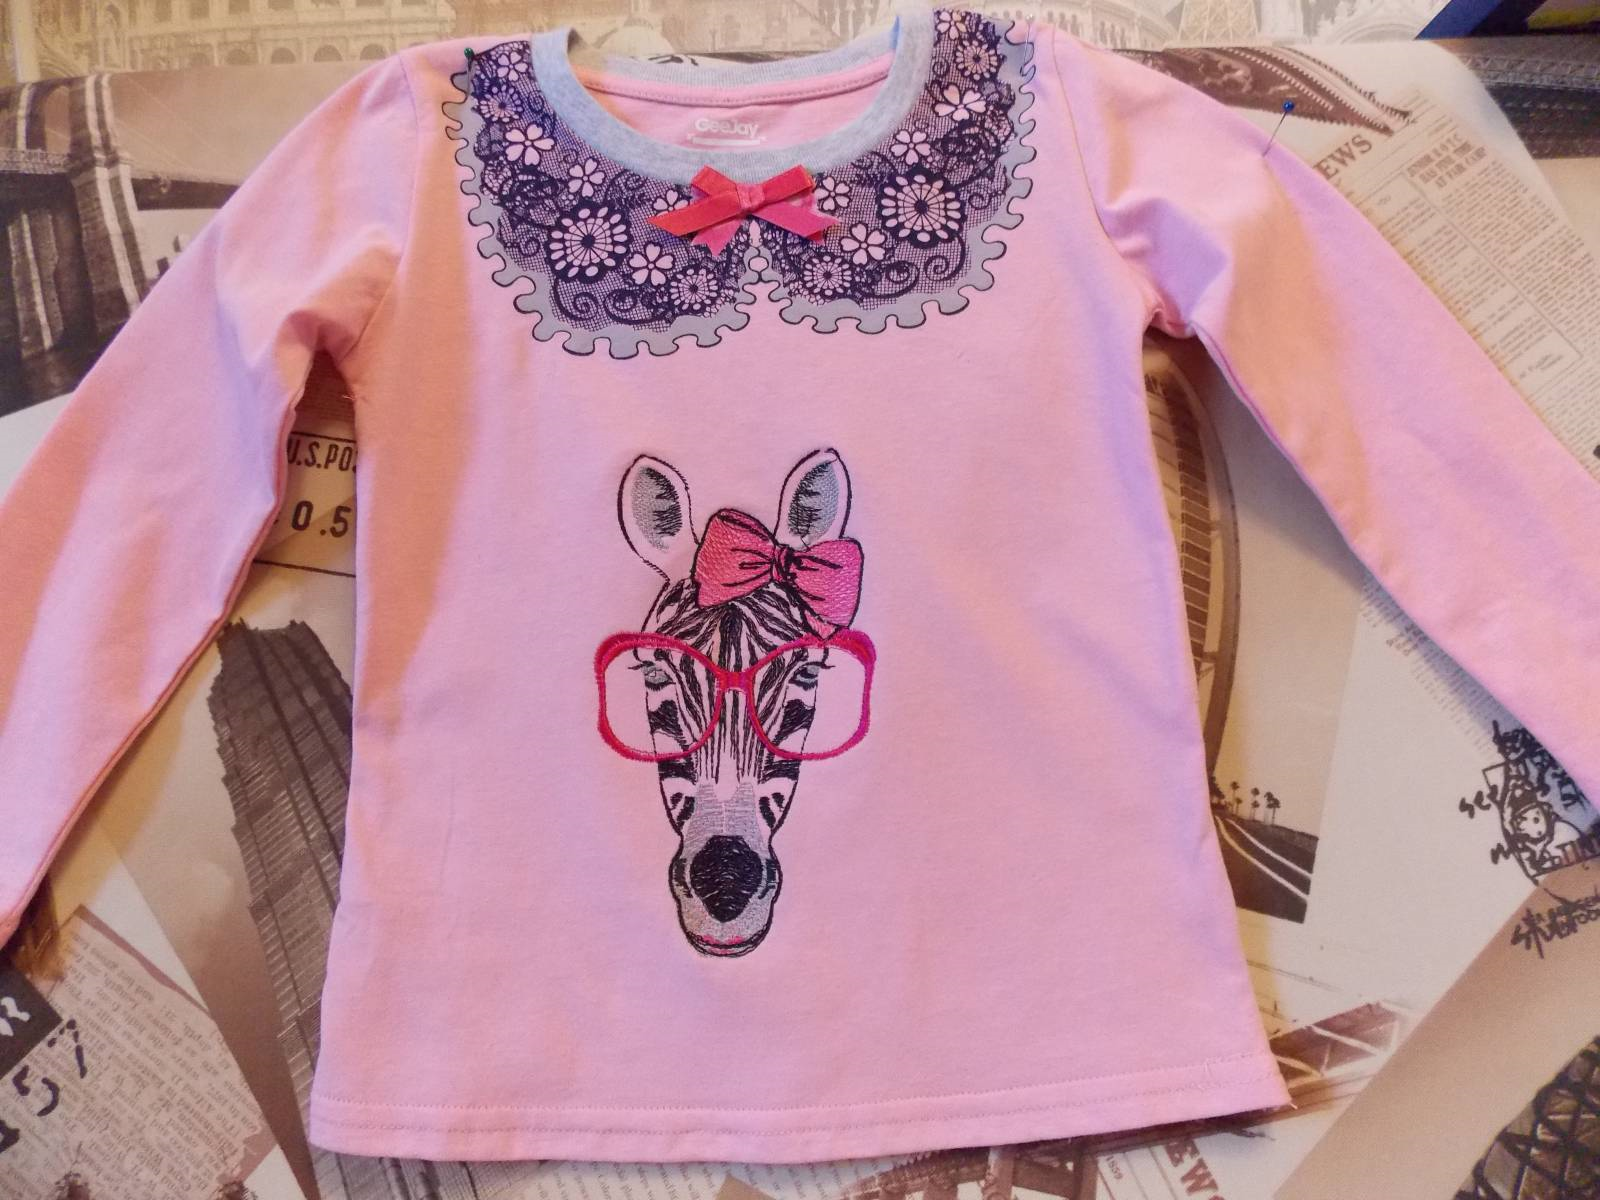 Girl's shirt with zebra free embroidery design